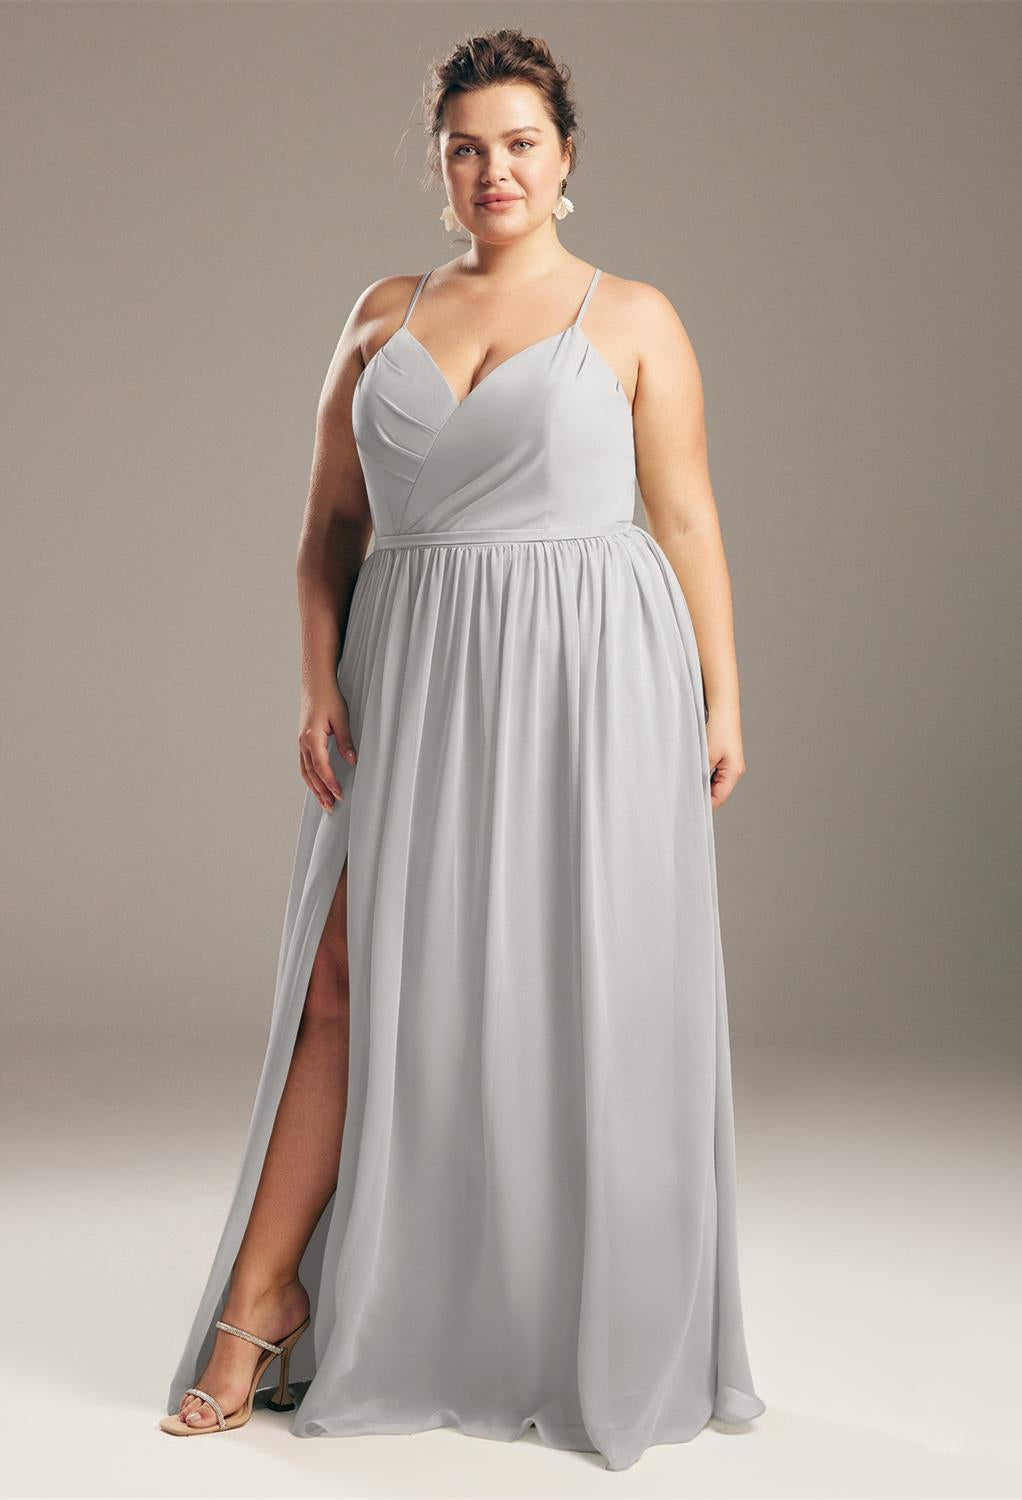 Woman in a gray Wilfreda - Chiffon Bridesmaid Dress - Off The Rack by Bergamot Bridal with a thigh-high slit, standing confidently against a neutral background.